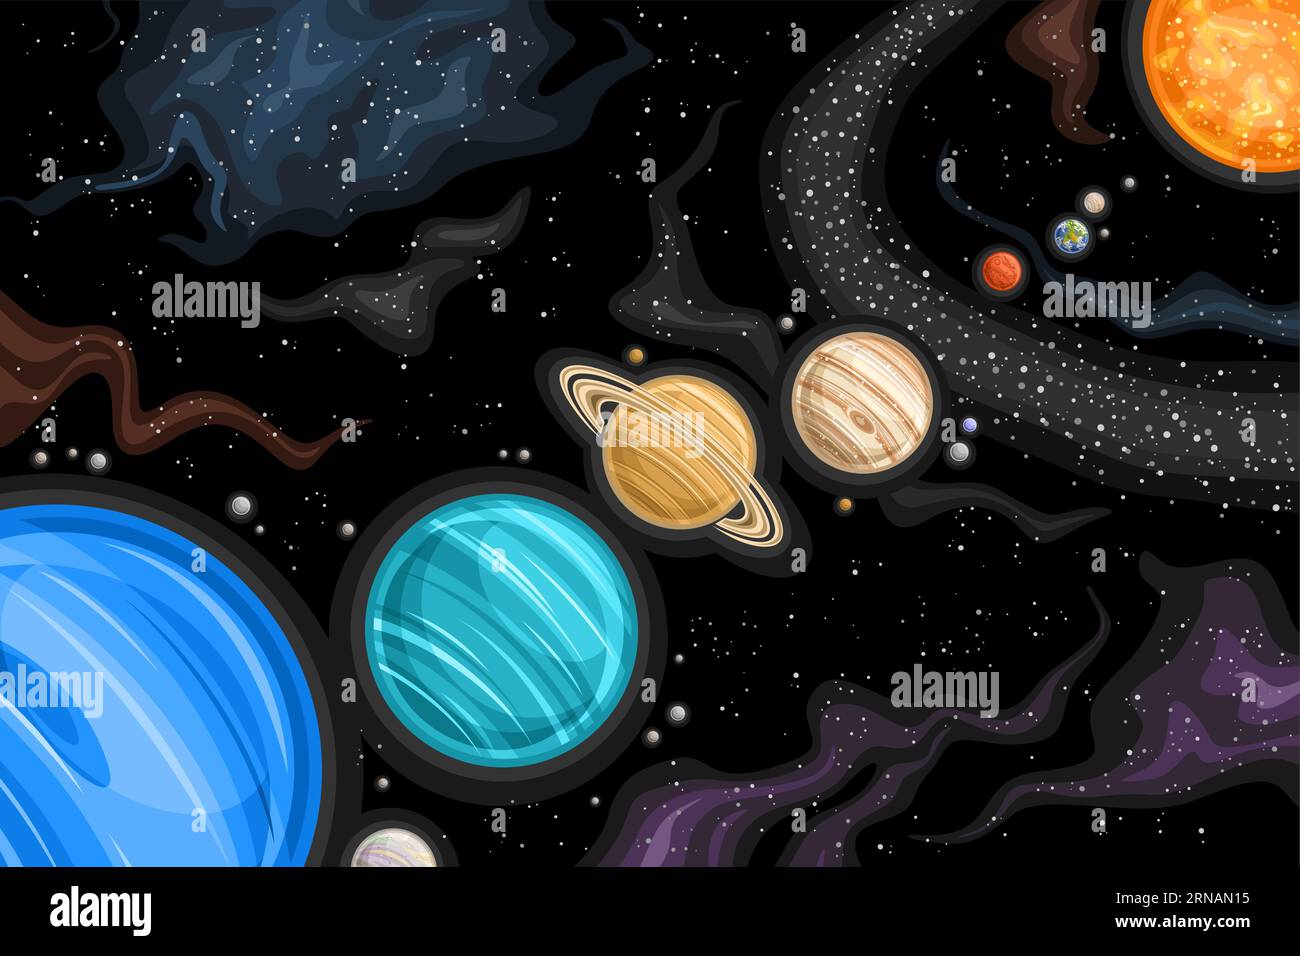 Vector Fantasy Space Chart, astronomical horizontal poster with illustration pf planet parade in Solar System, decorative futuristic cosmo print with Stock Vector